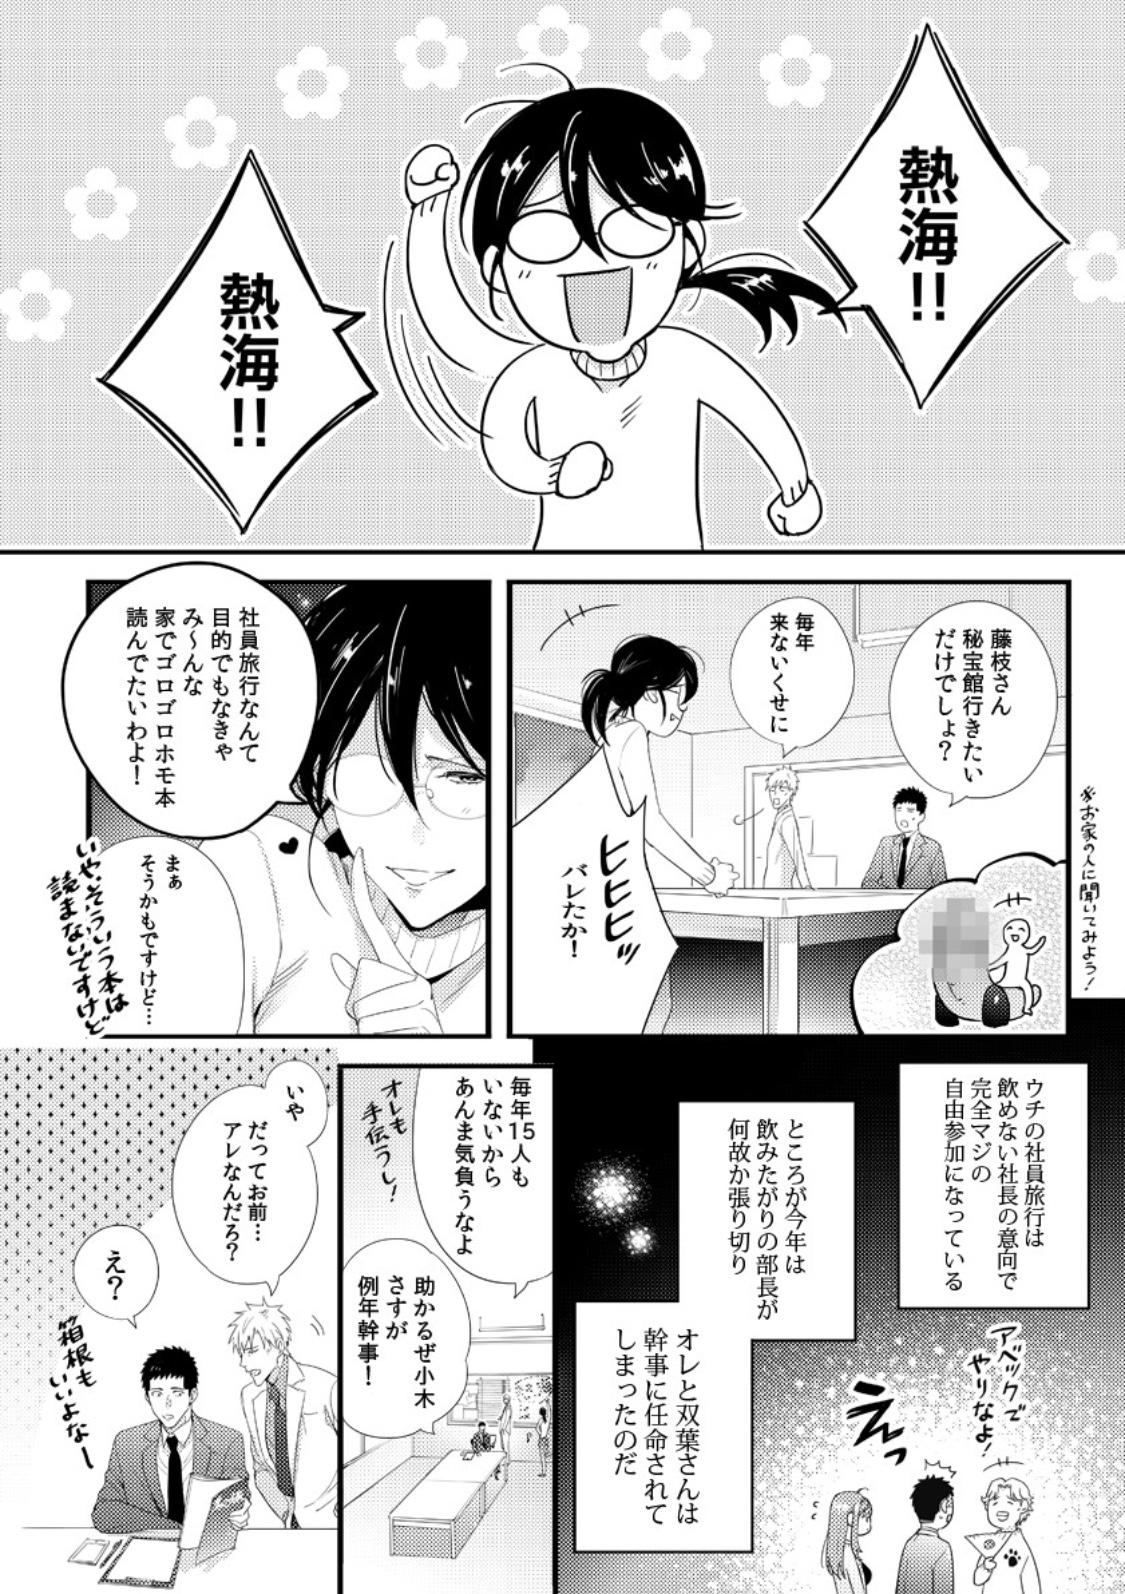 Please Let Me Hold You Futaba-San! Ch. 1-4 4